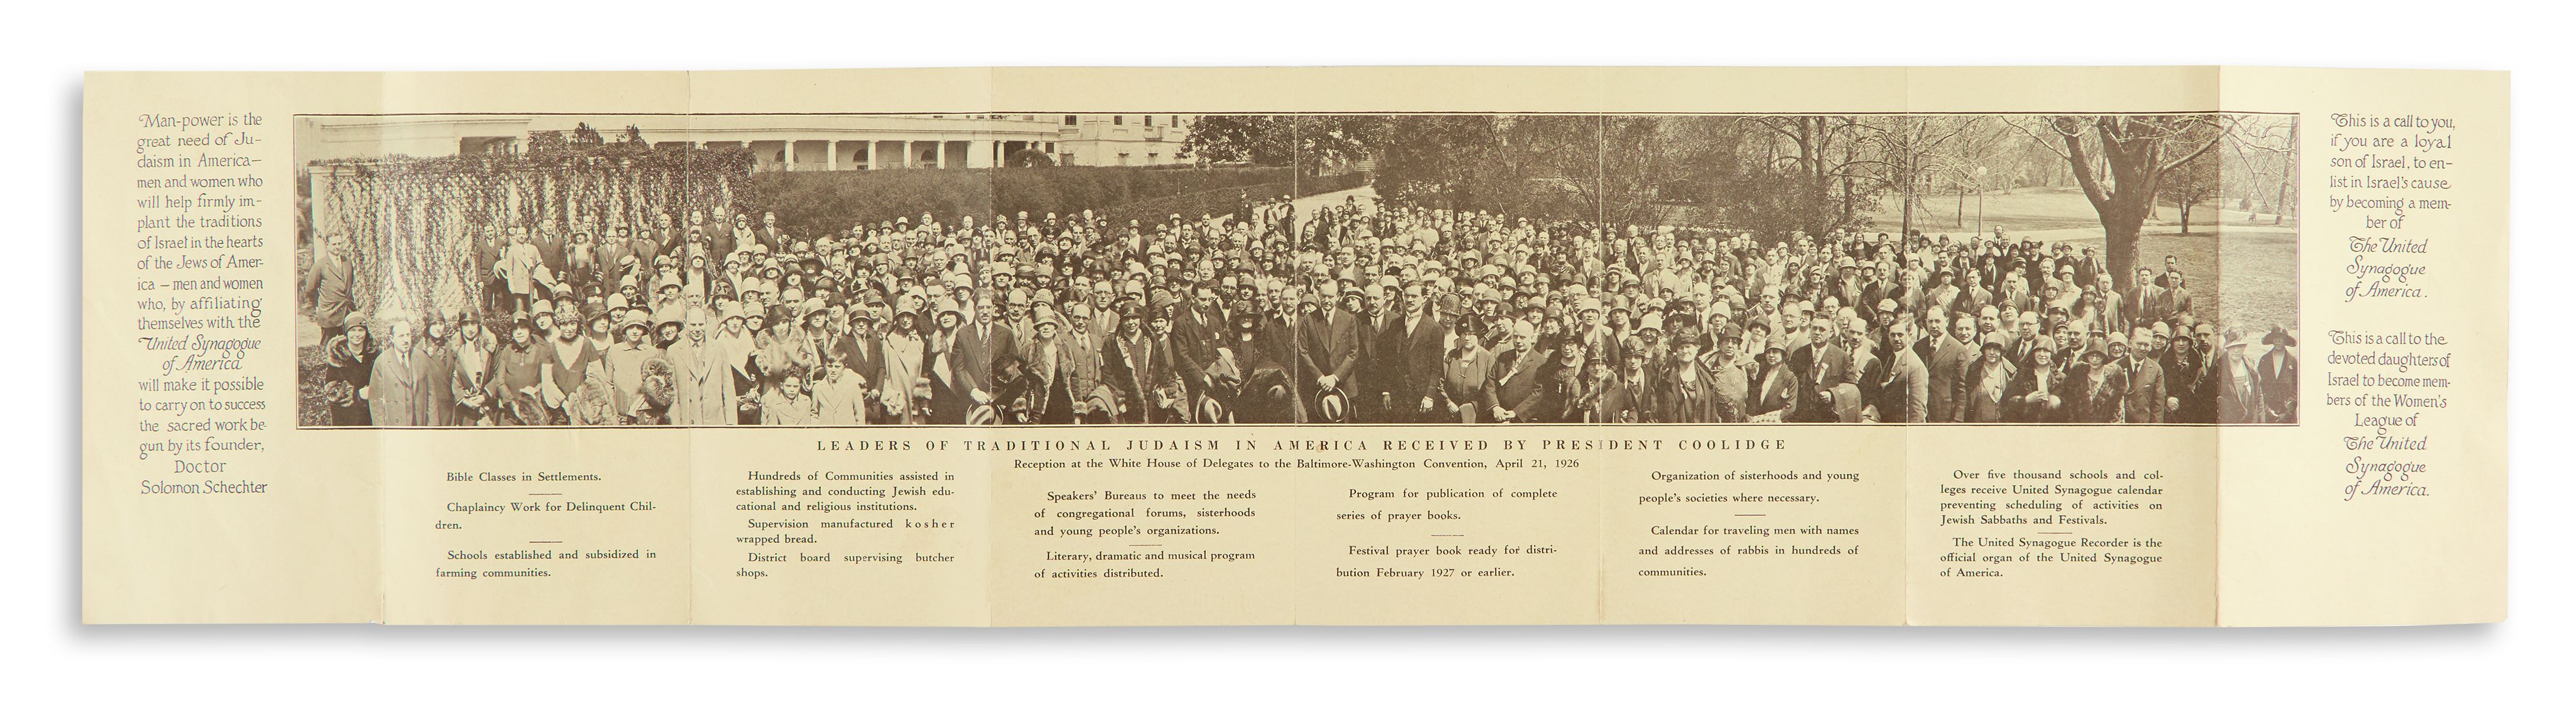 Leaders of Traditional Judaism in America Received by President Coolidge.